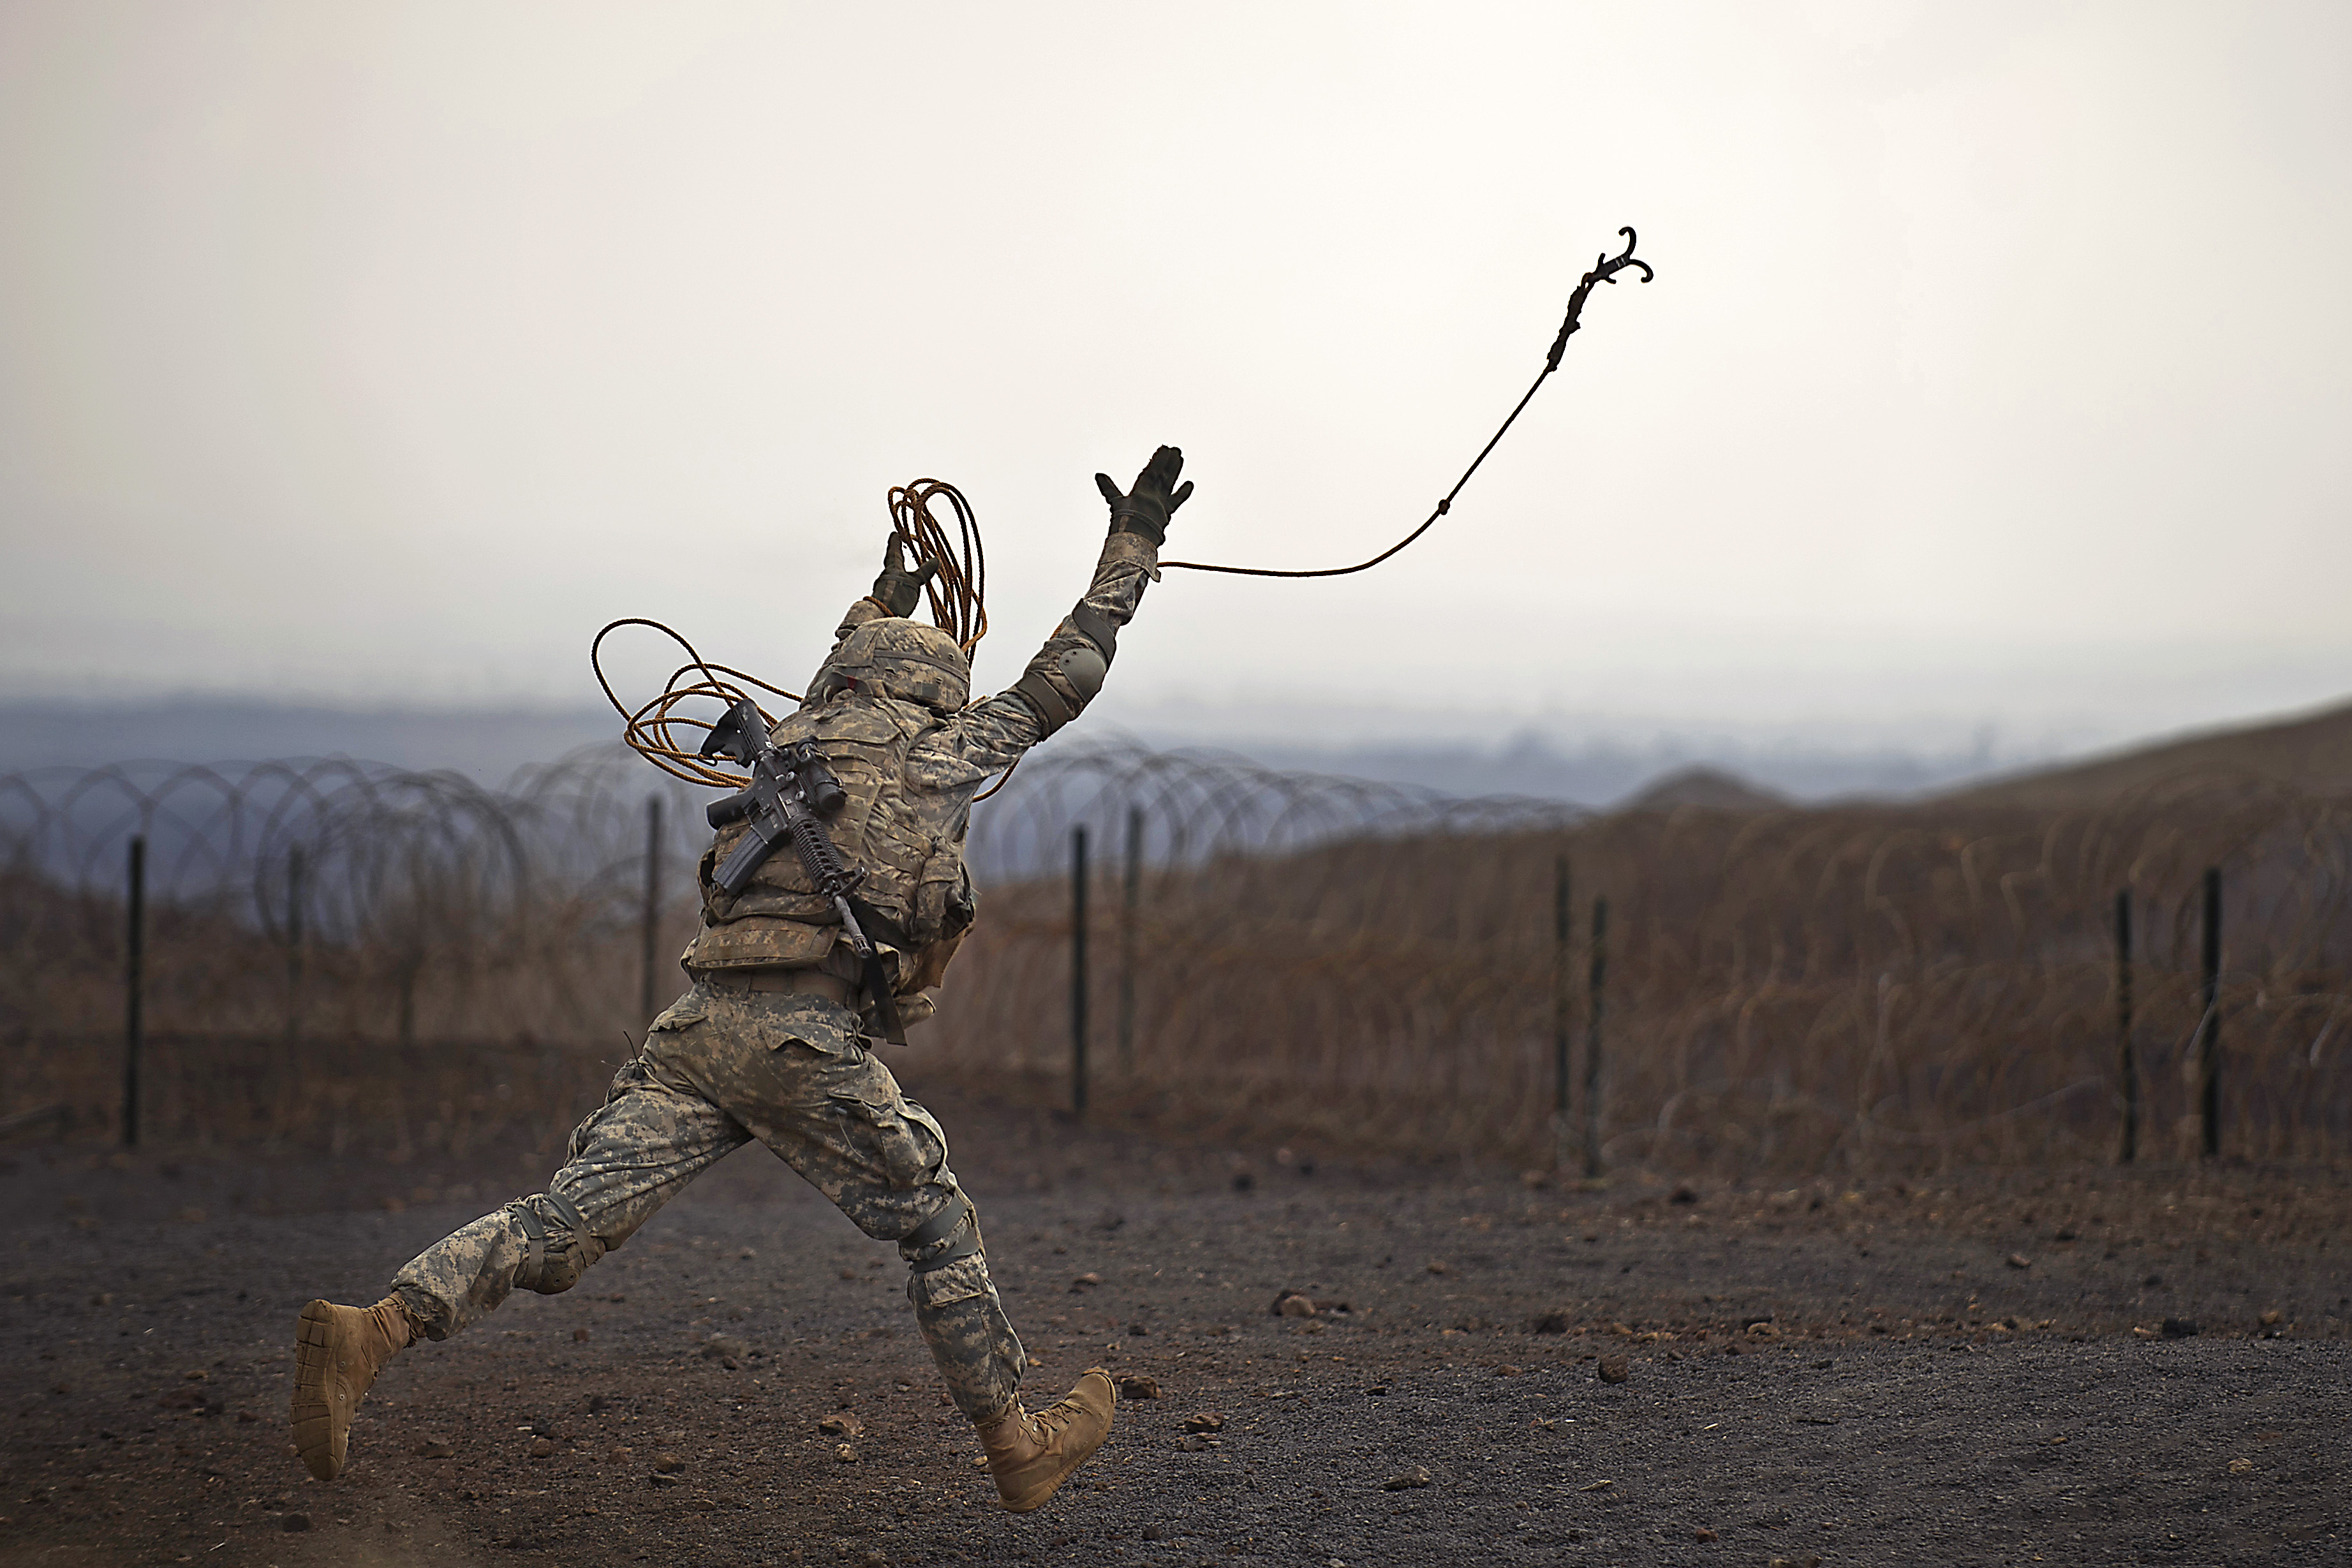 Army Spc. Kyle Norman runs and throws a grappling hook into a simulated  mine field during